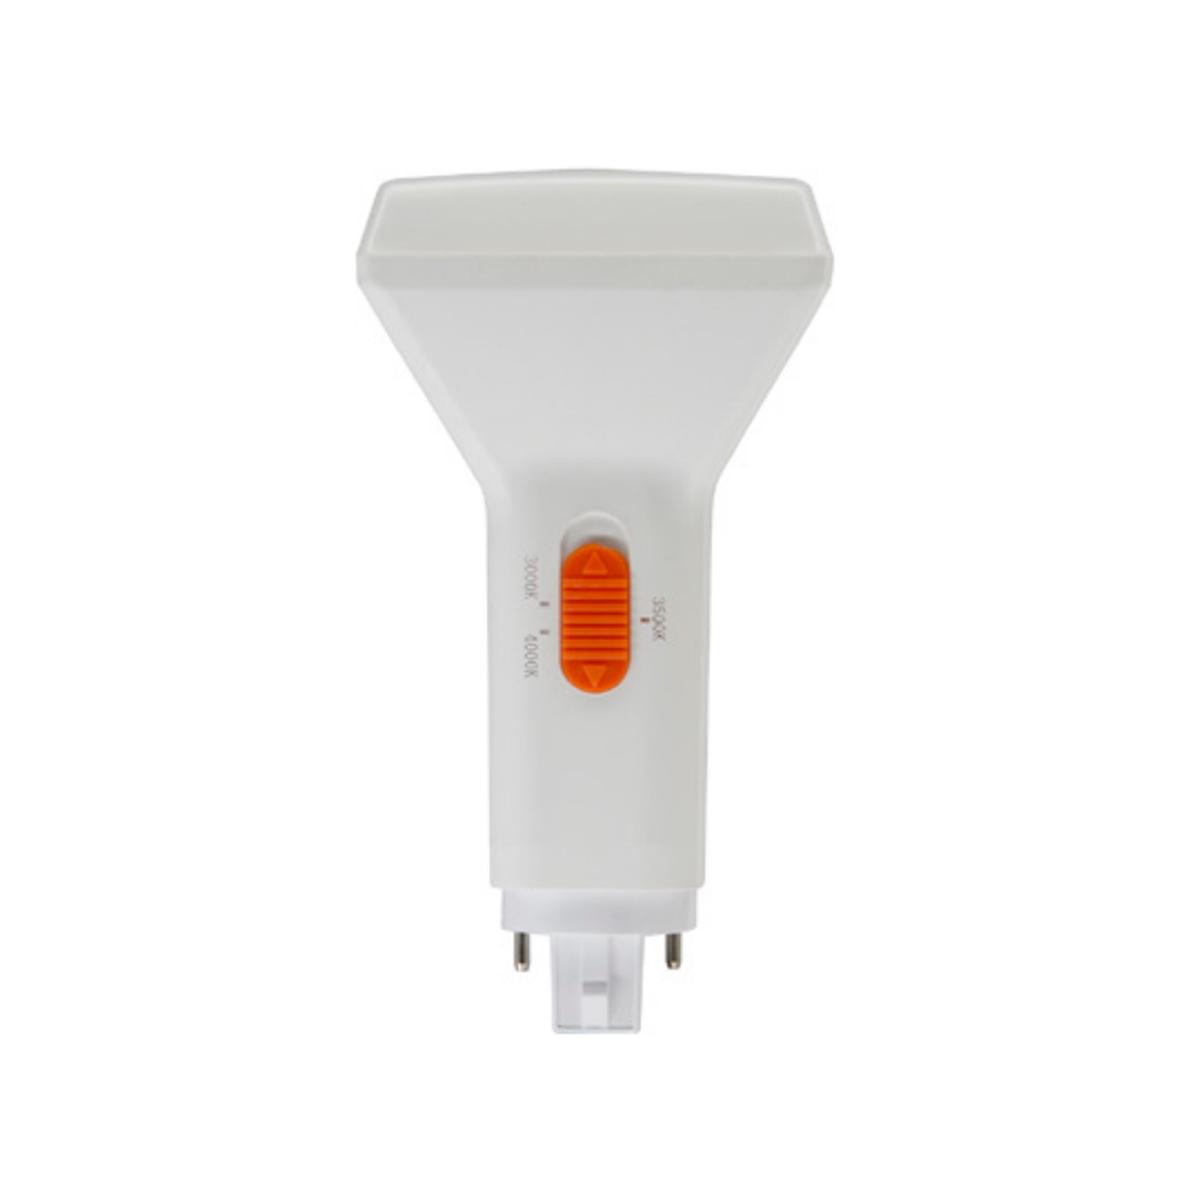 2 pin PL LED Bulb, 9 Watt 1150 Lumens, Selectable CCT 30K/35K/40K, Vertical, Replaces 26W CFL, G24d Base, Direct Or Bypass